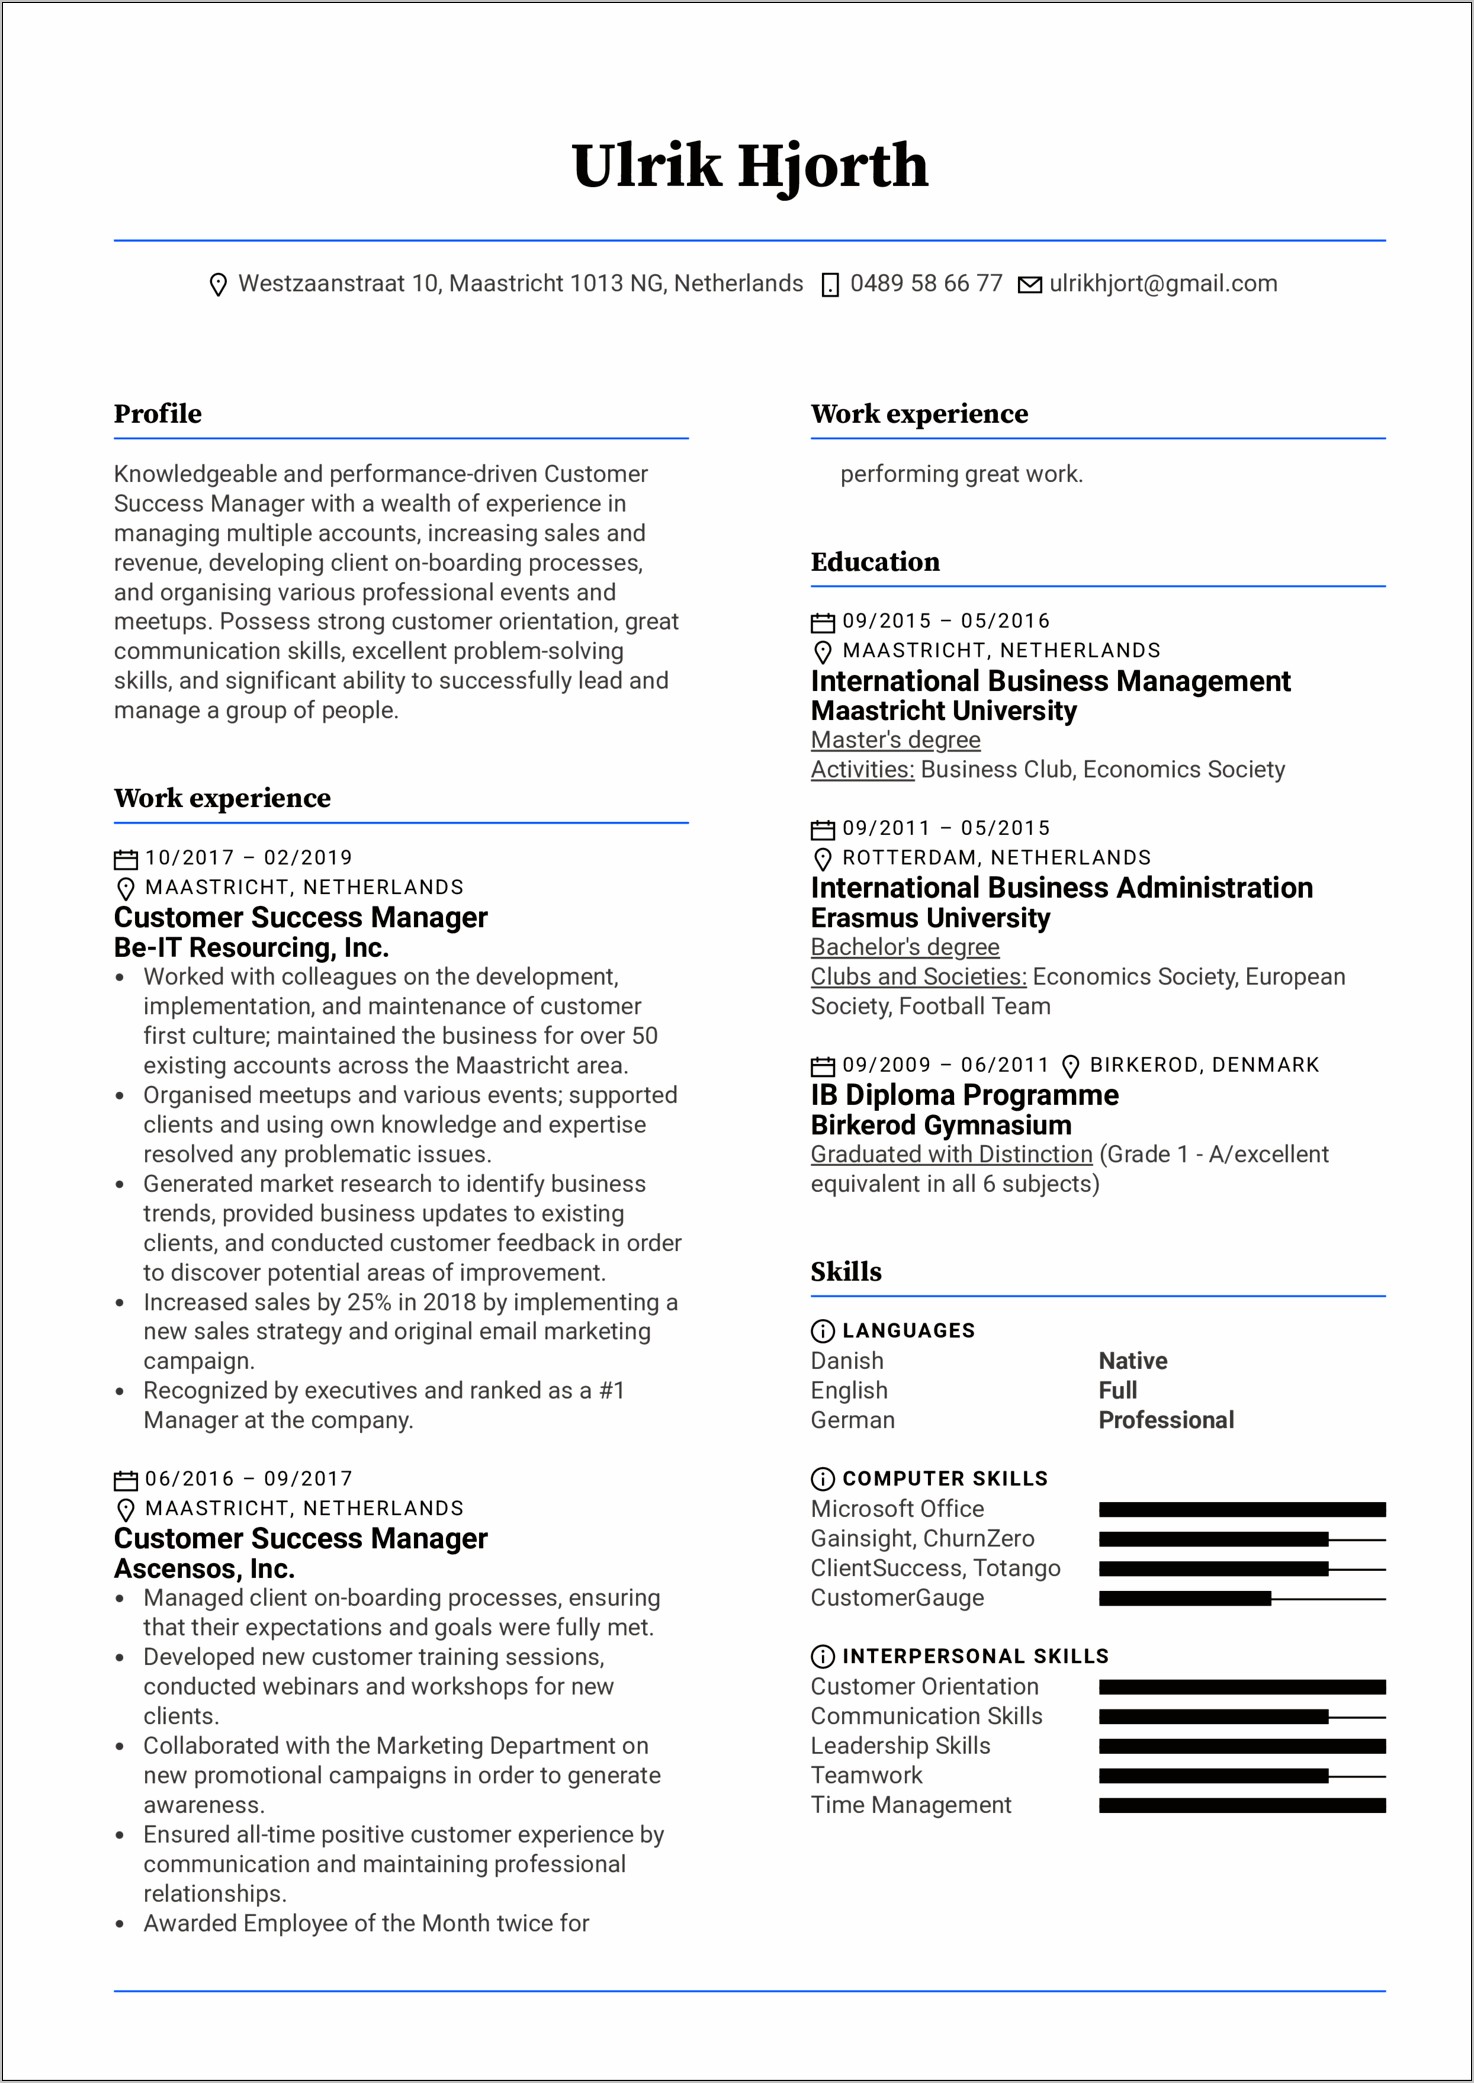 Resume Experience Manager Customer Service